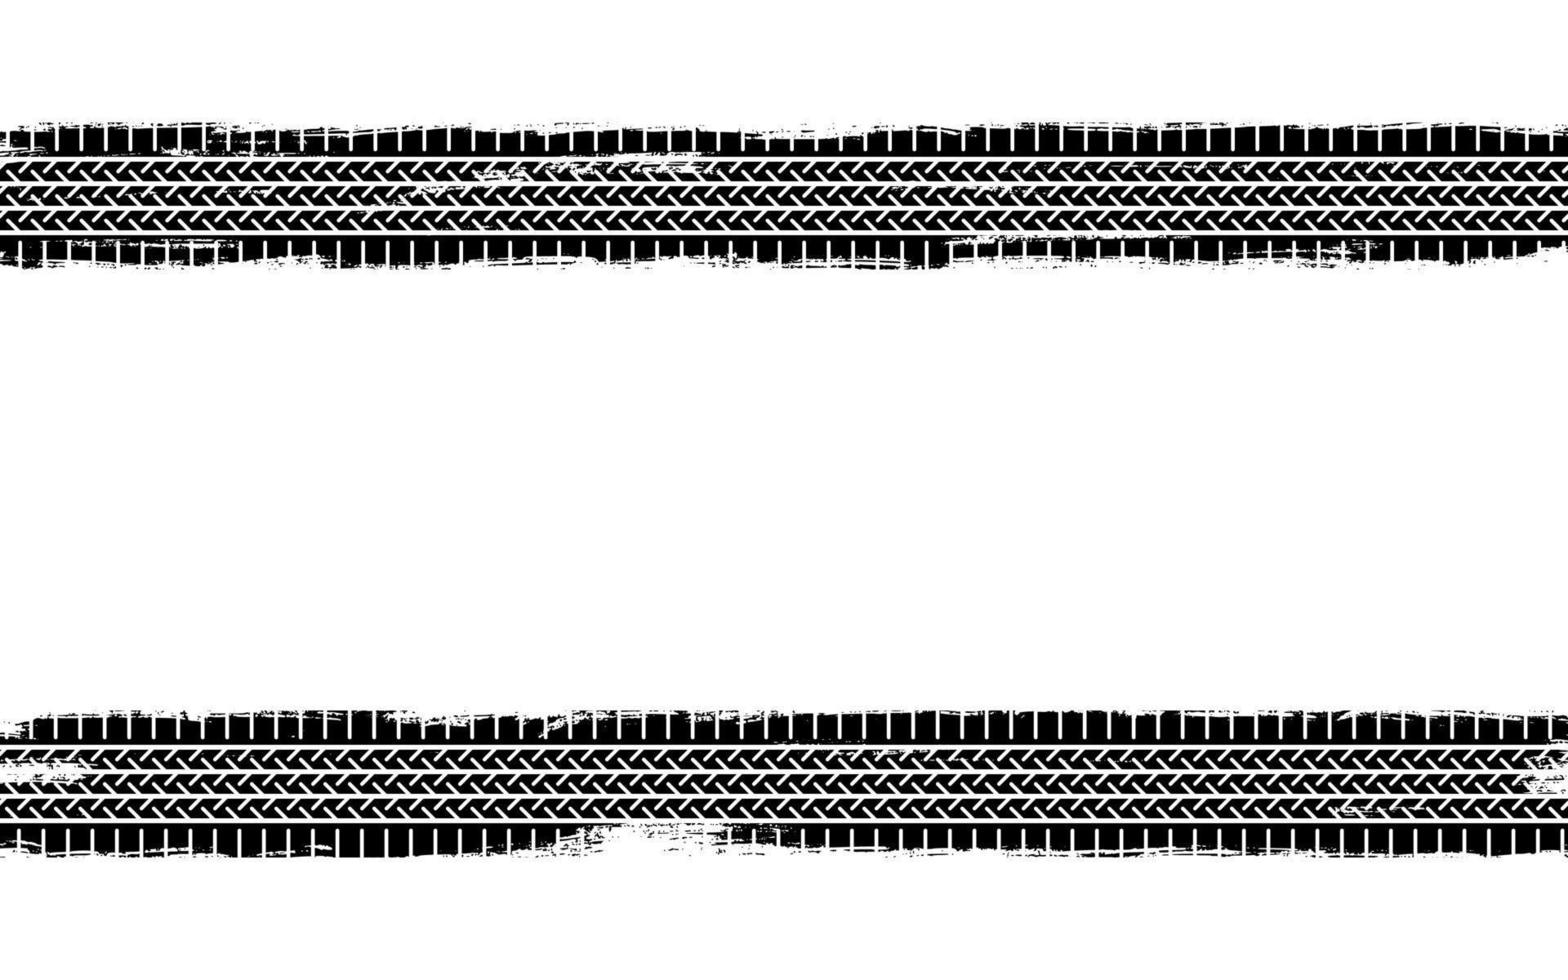 Auto tire tread grunge element. Car and motorcycle tire pattern, wheel tyre tread track. Black tyre print. Vector illustration isolated on white background